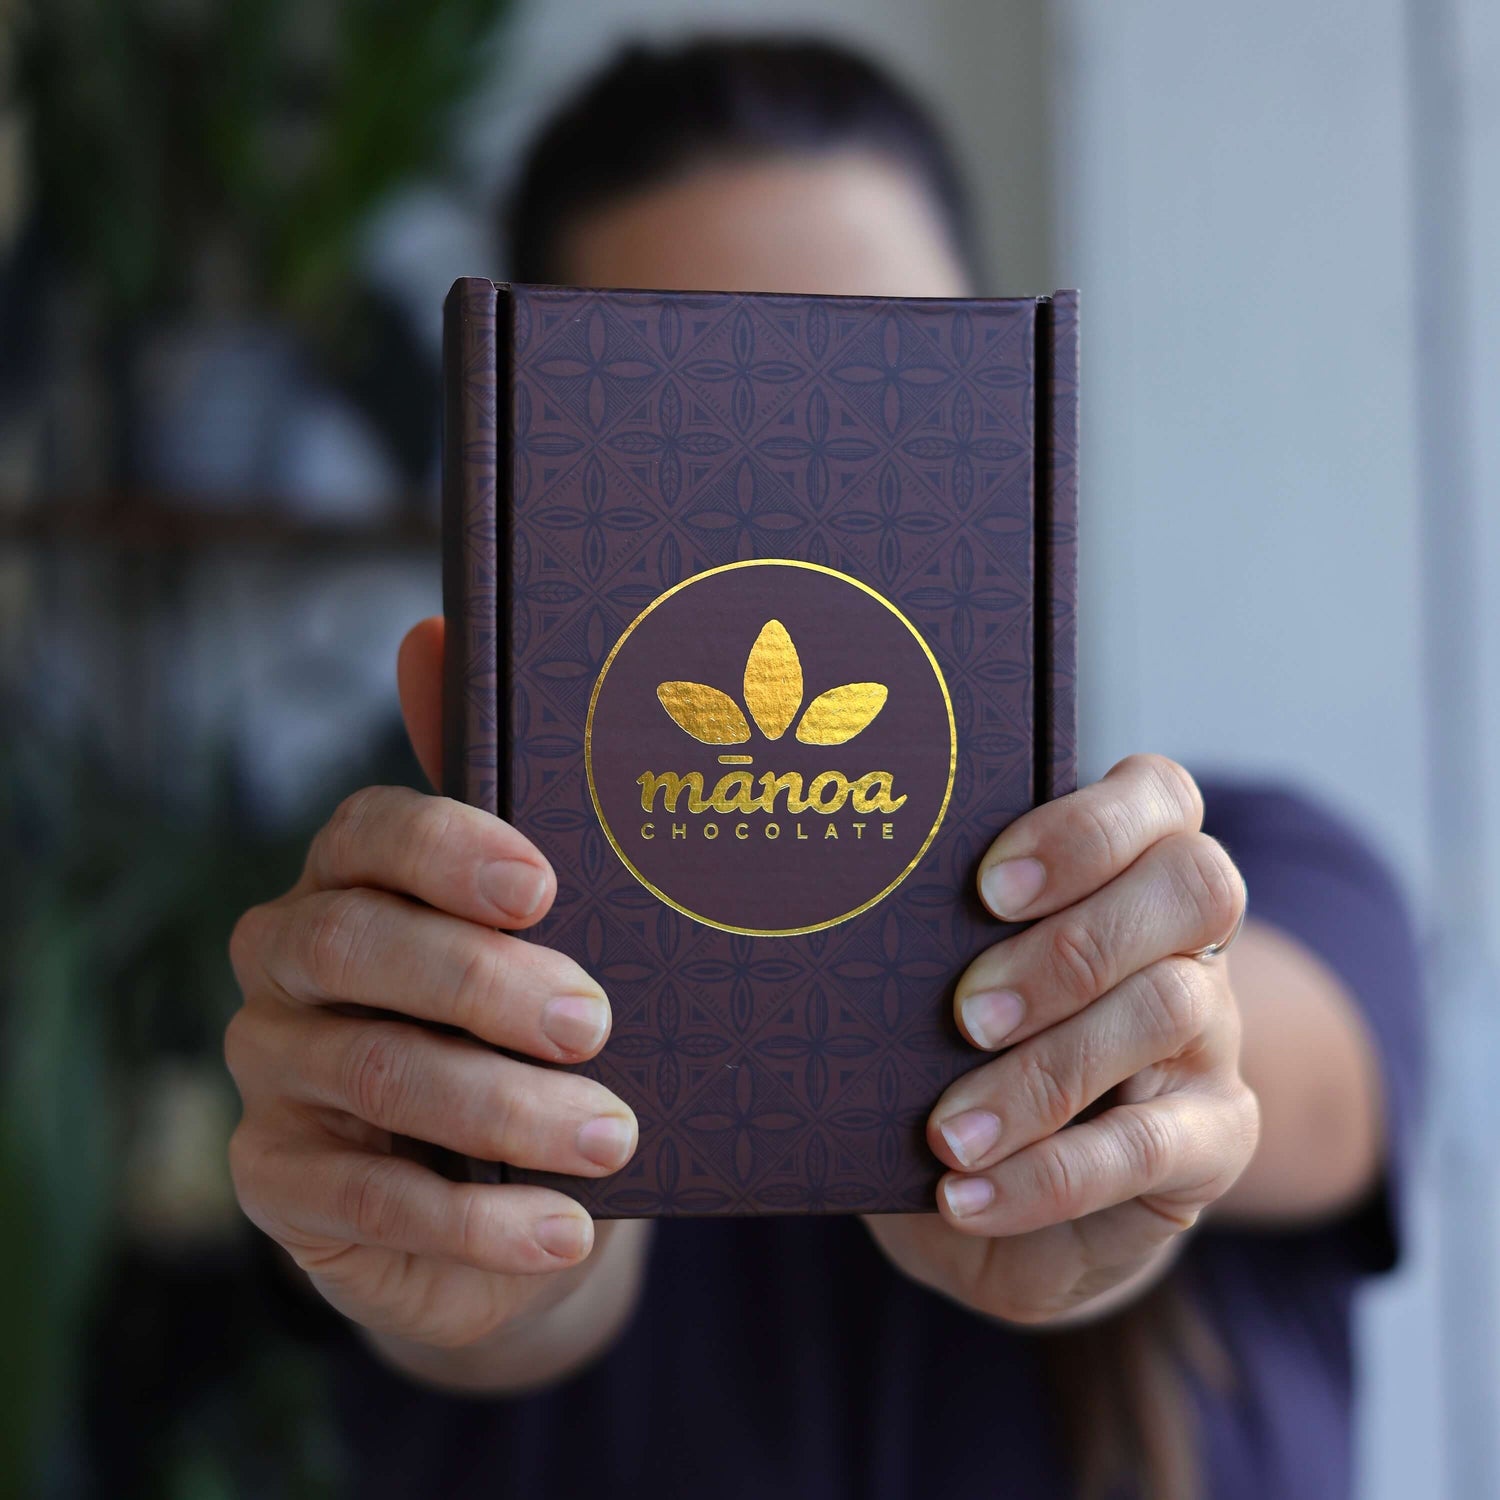 Image of person holding box of chocolate with gold Manoa logo